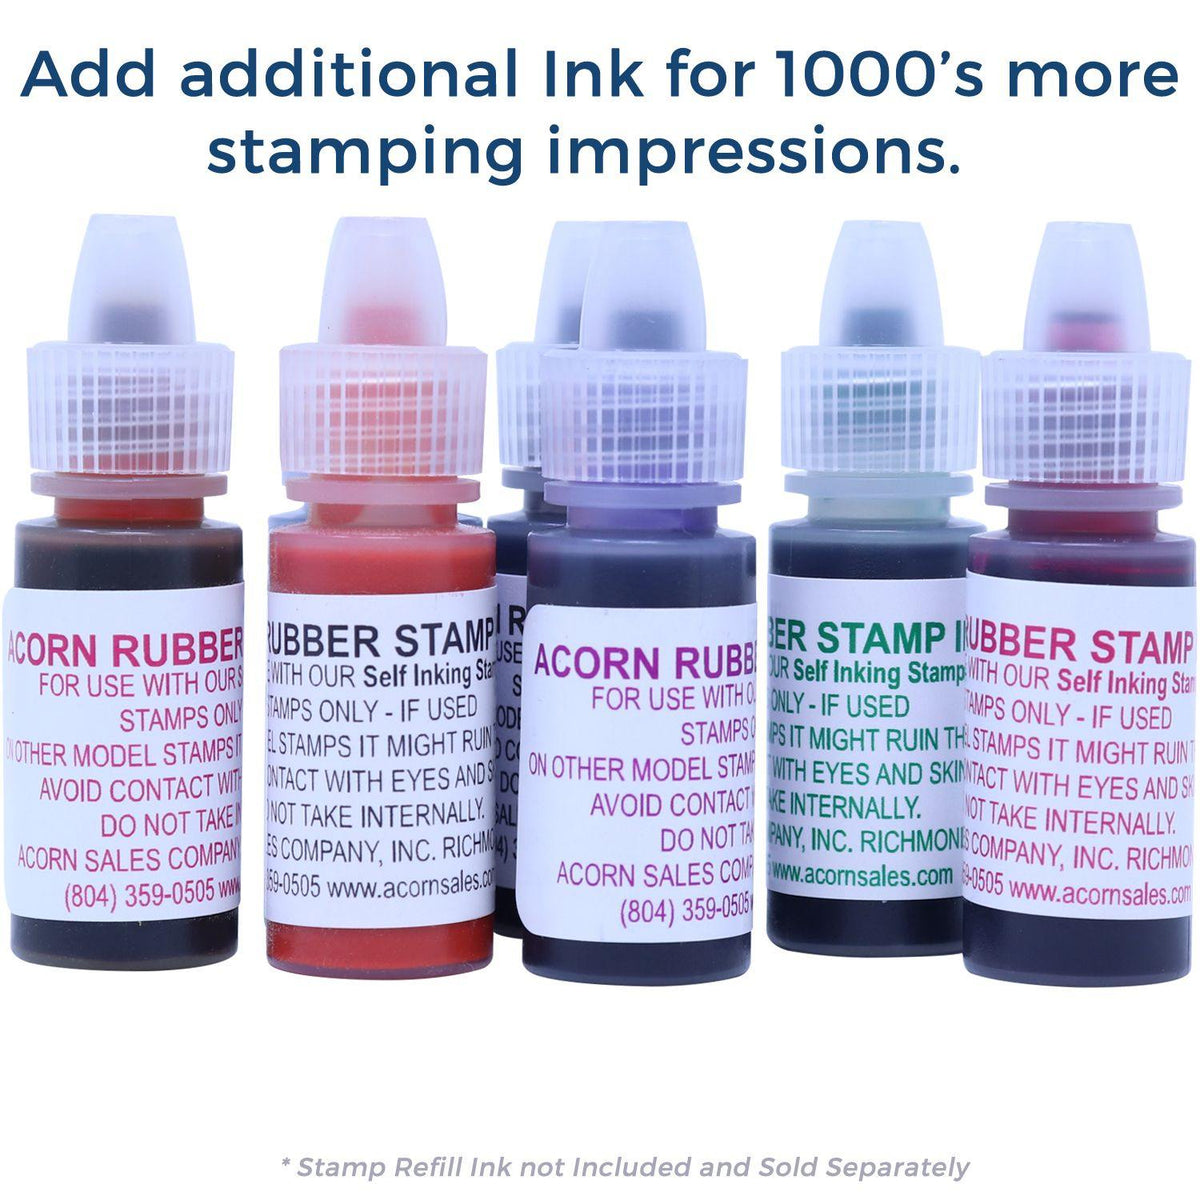 Refill Inks for Large Pre-Inked Social Distancing Stamp Available